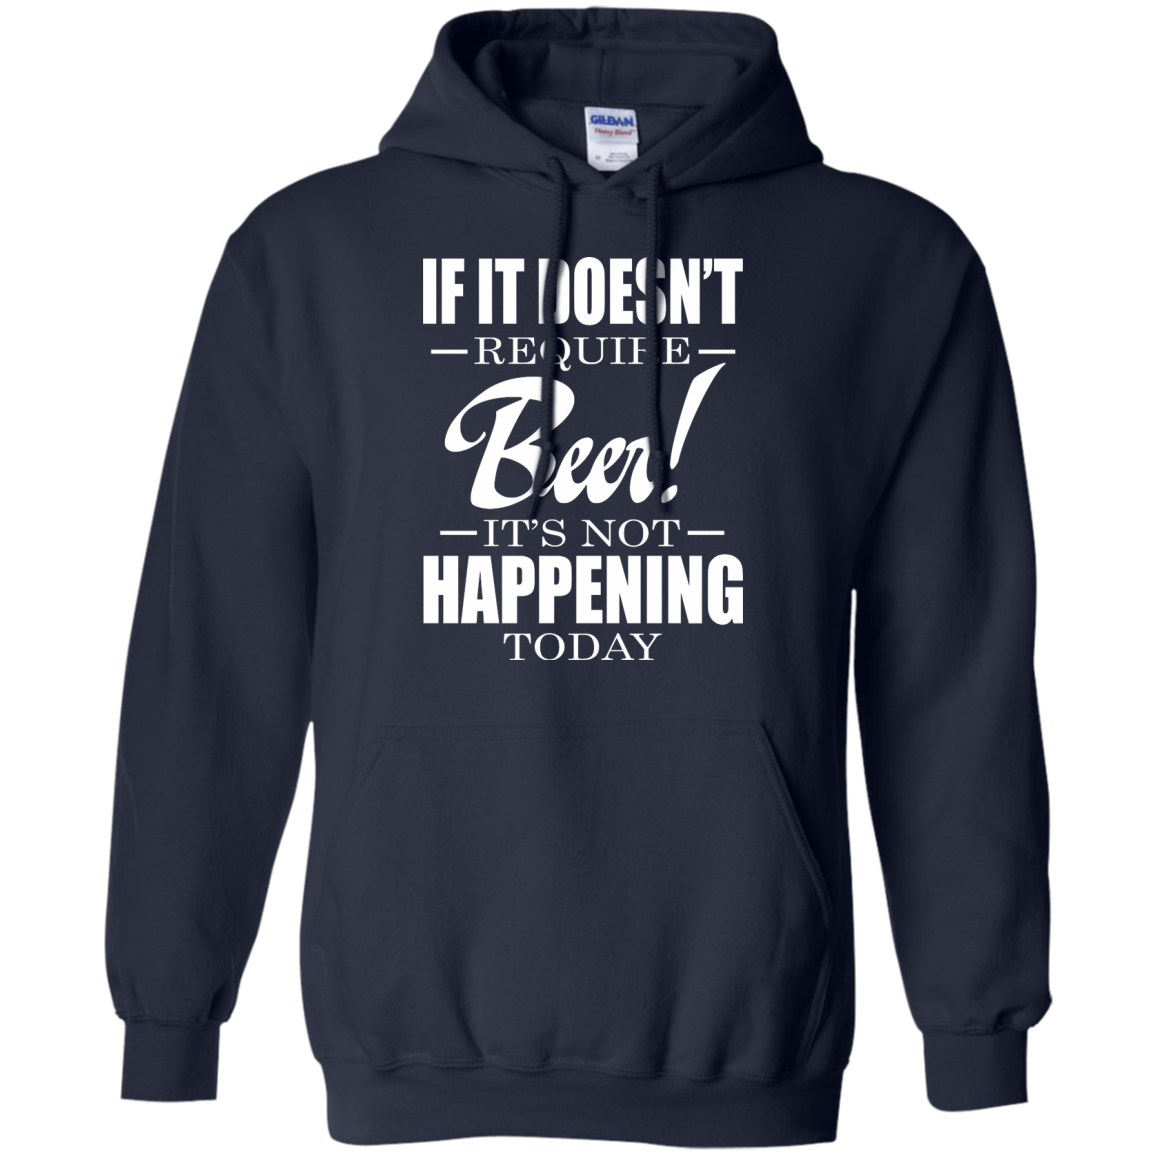 If It Doesn't Require Beer - It's Not Happening Today Shirt, Hoodie ...